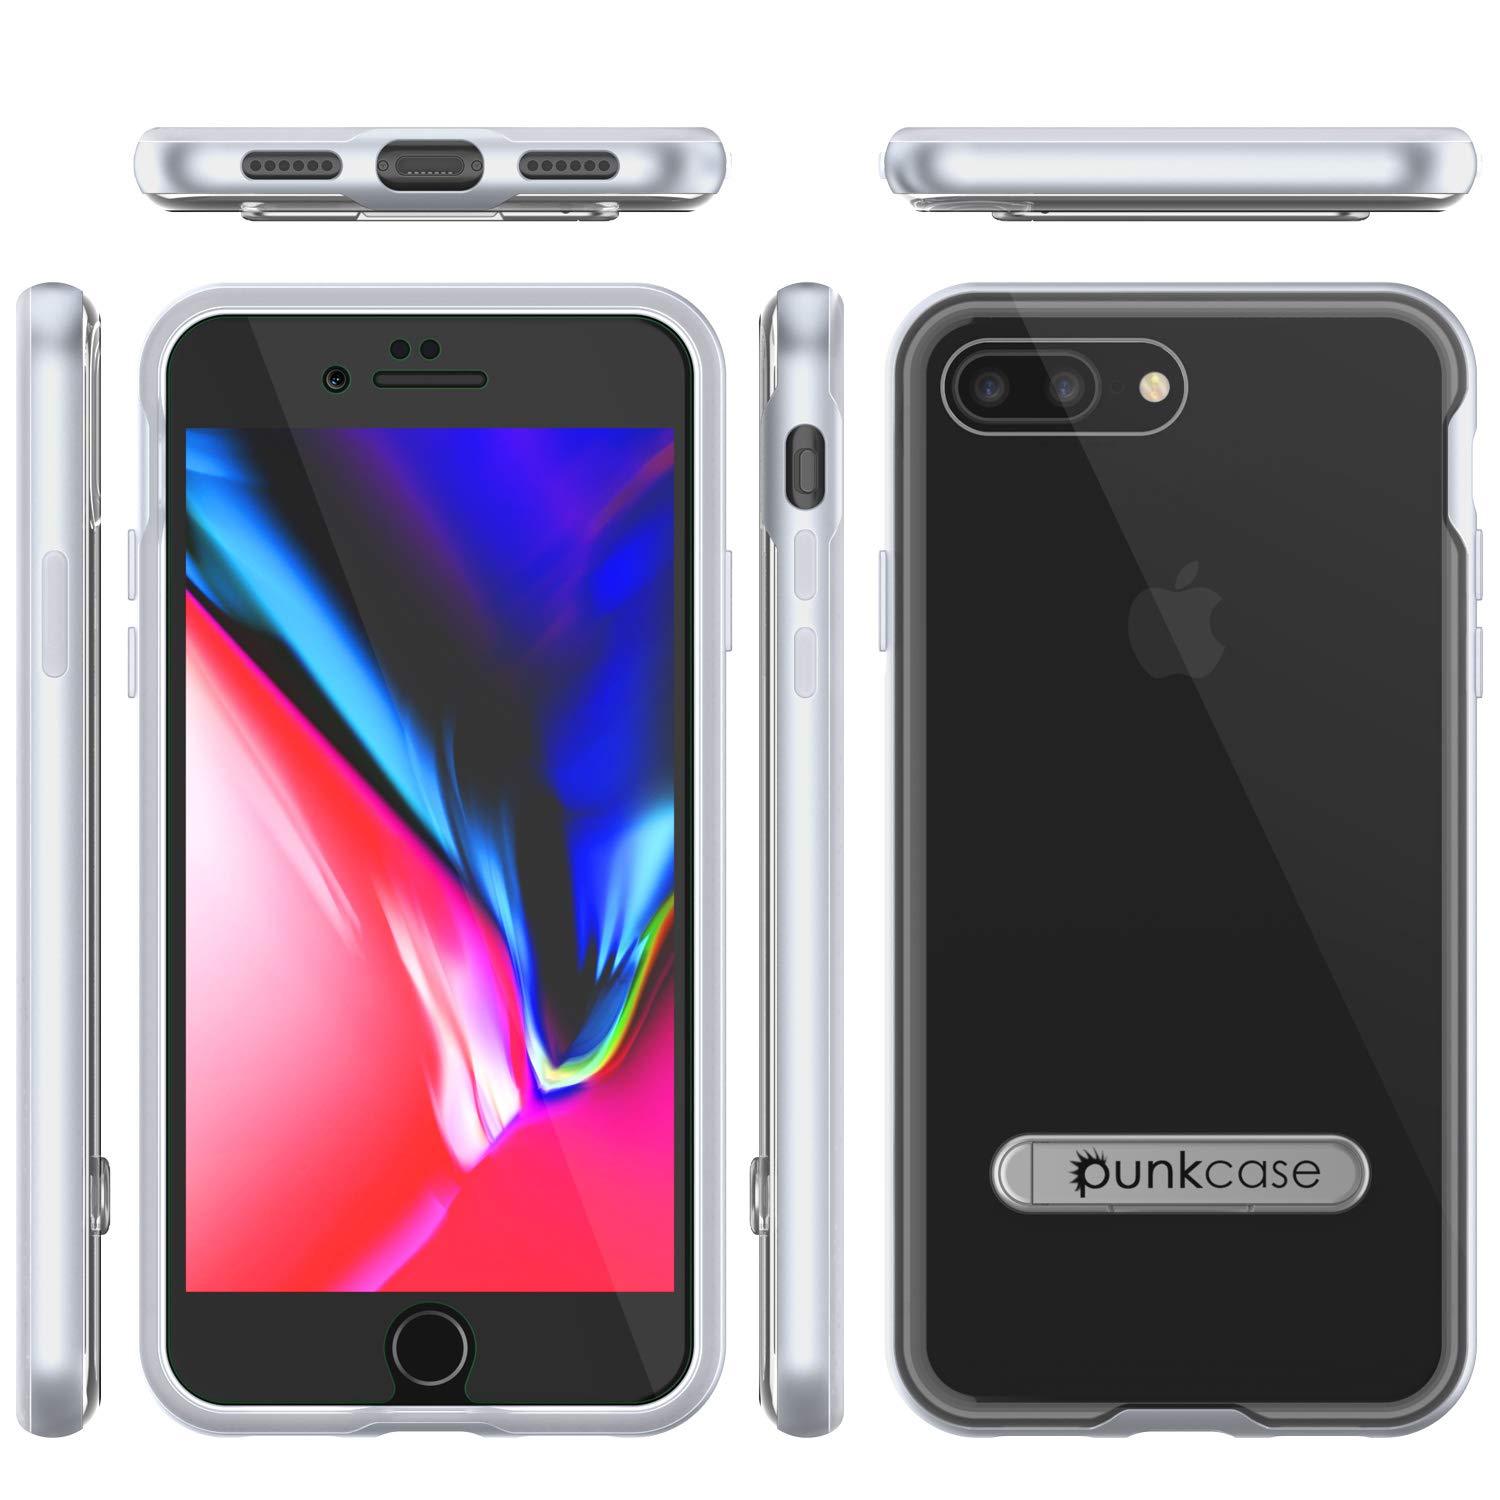 PunkCase iPhone 8+ Plus Lucid 3.0 Screen Protector W/ Anti-Shock Case [Silver]